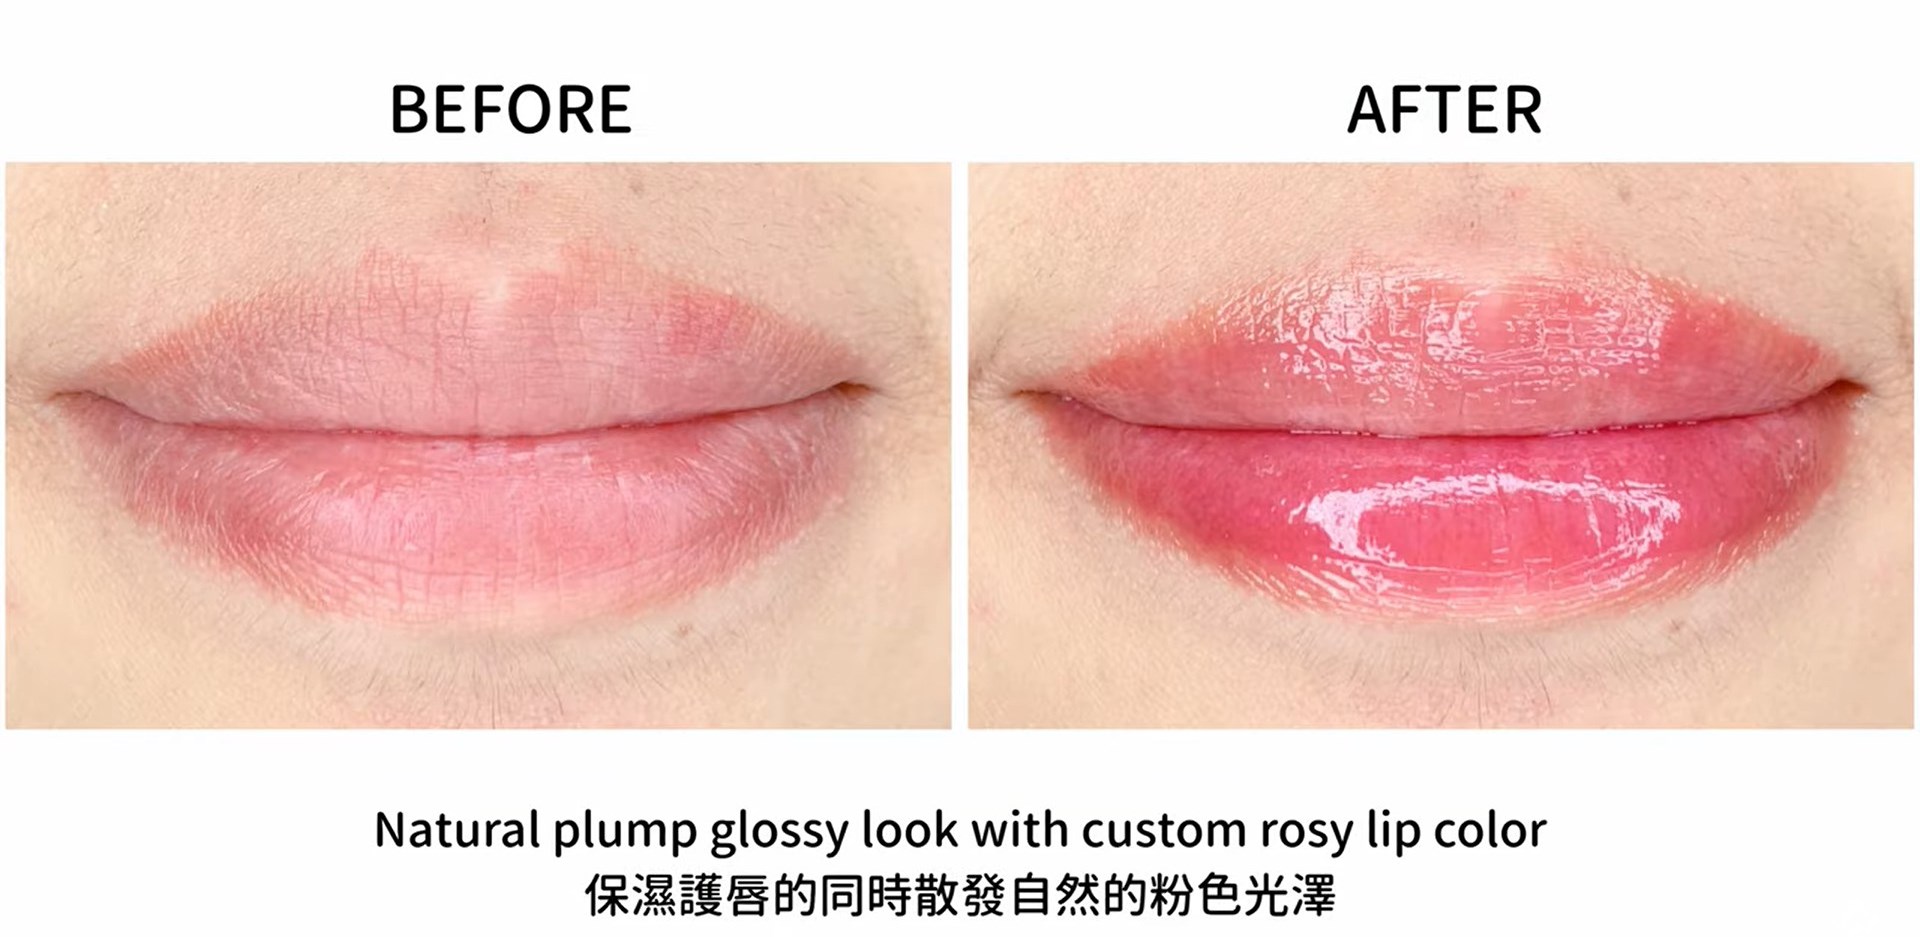 《Color Changing Lip Gloss 變色唇蜜》Contract Manufacturing Cosmetics｜ 化妝品代工OEM_Before&After